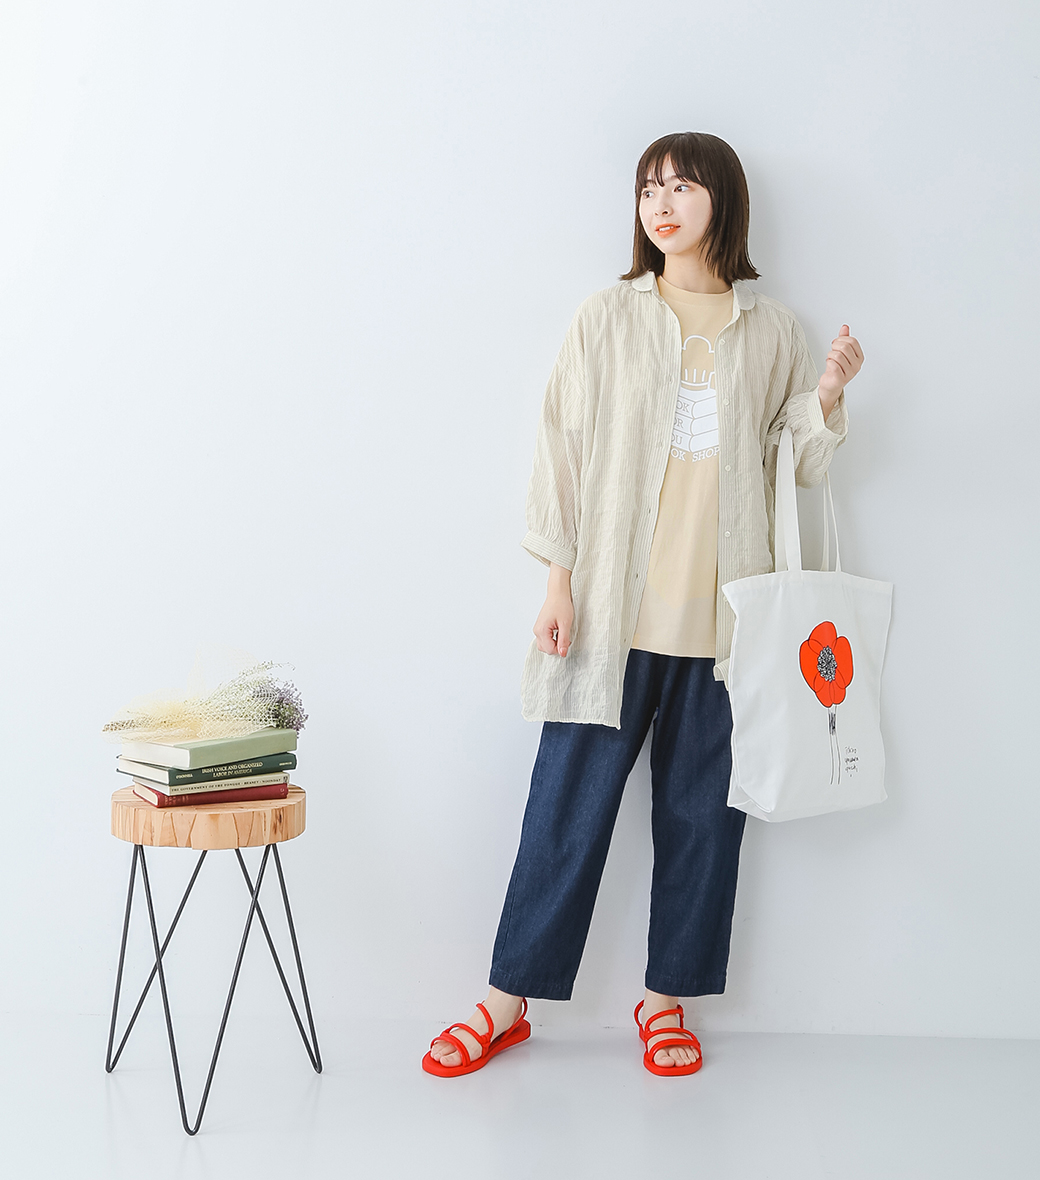 【 conges payes ADIEU TRISTESSE 】シャーリング　ロングシャツ／正面カット